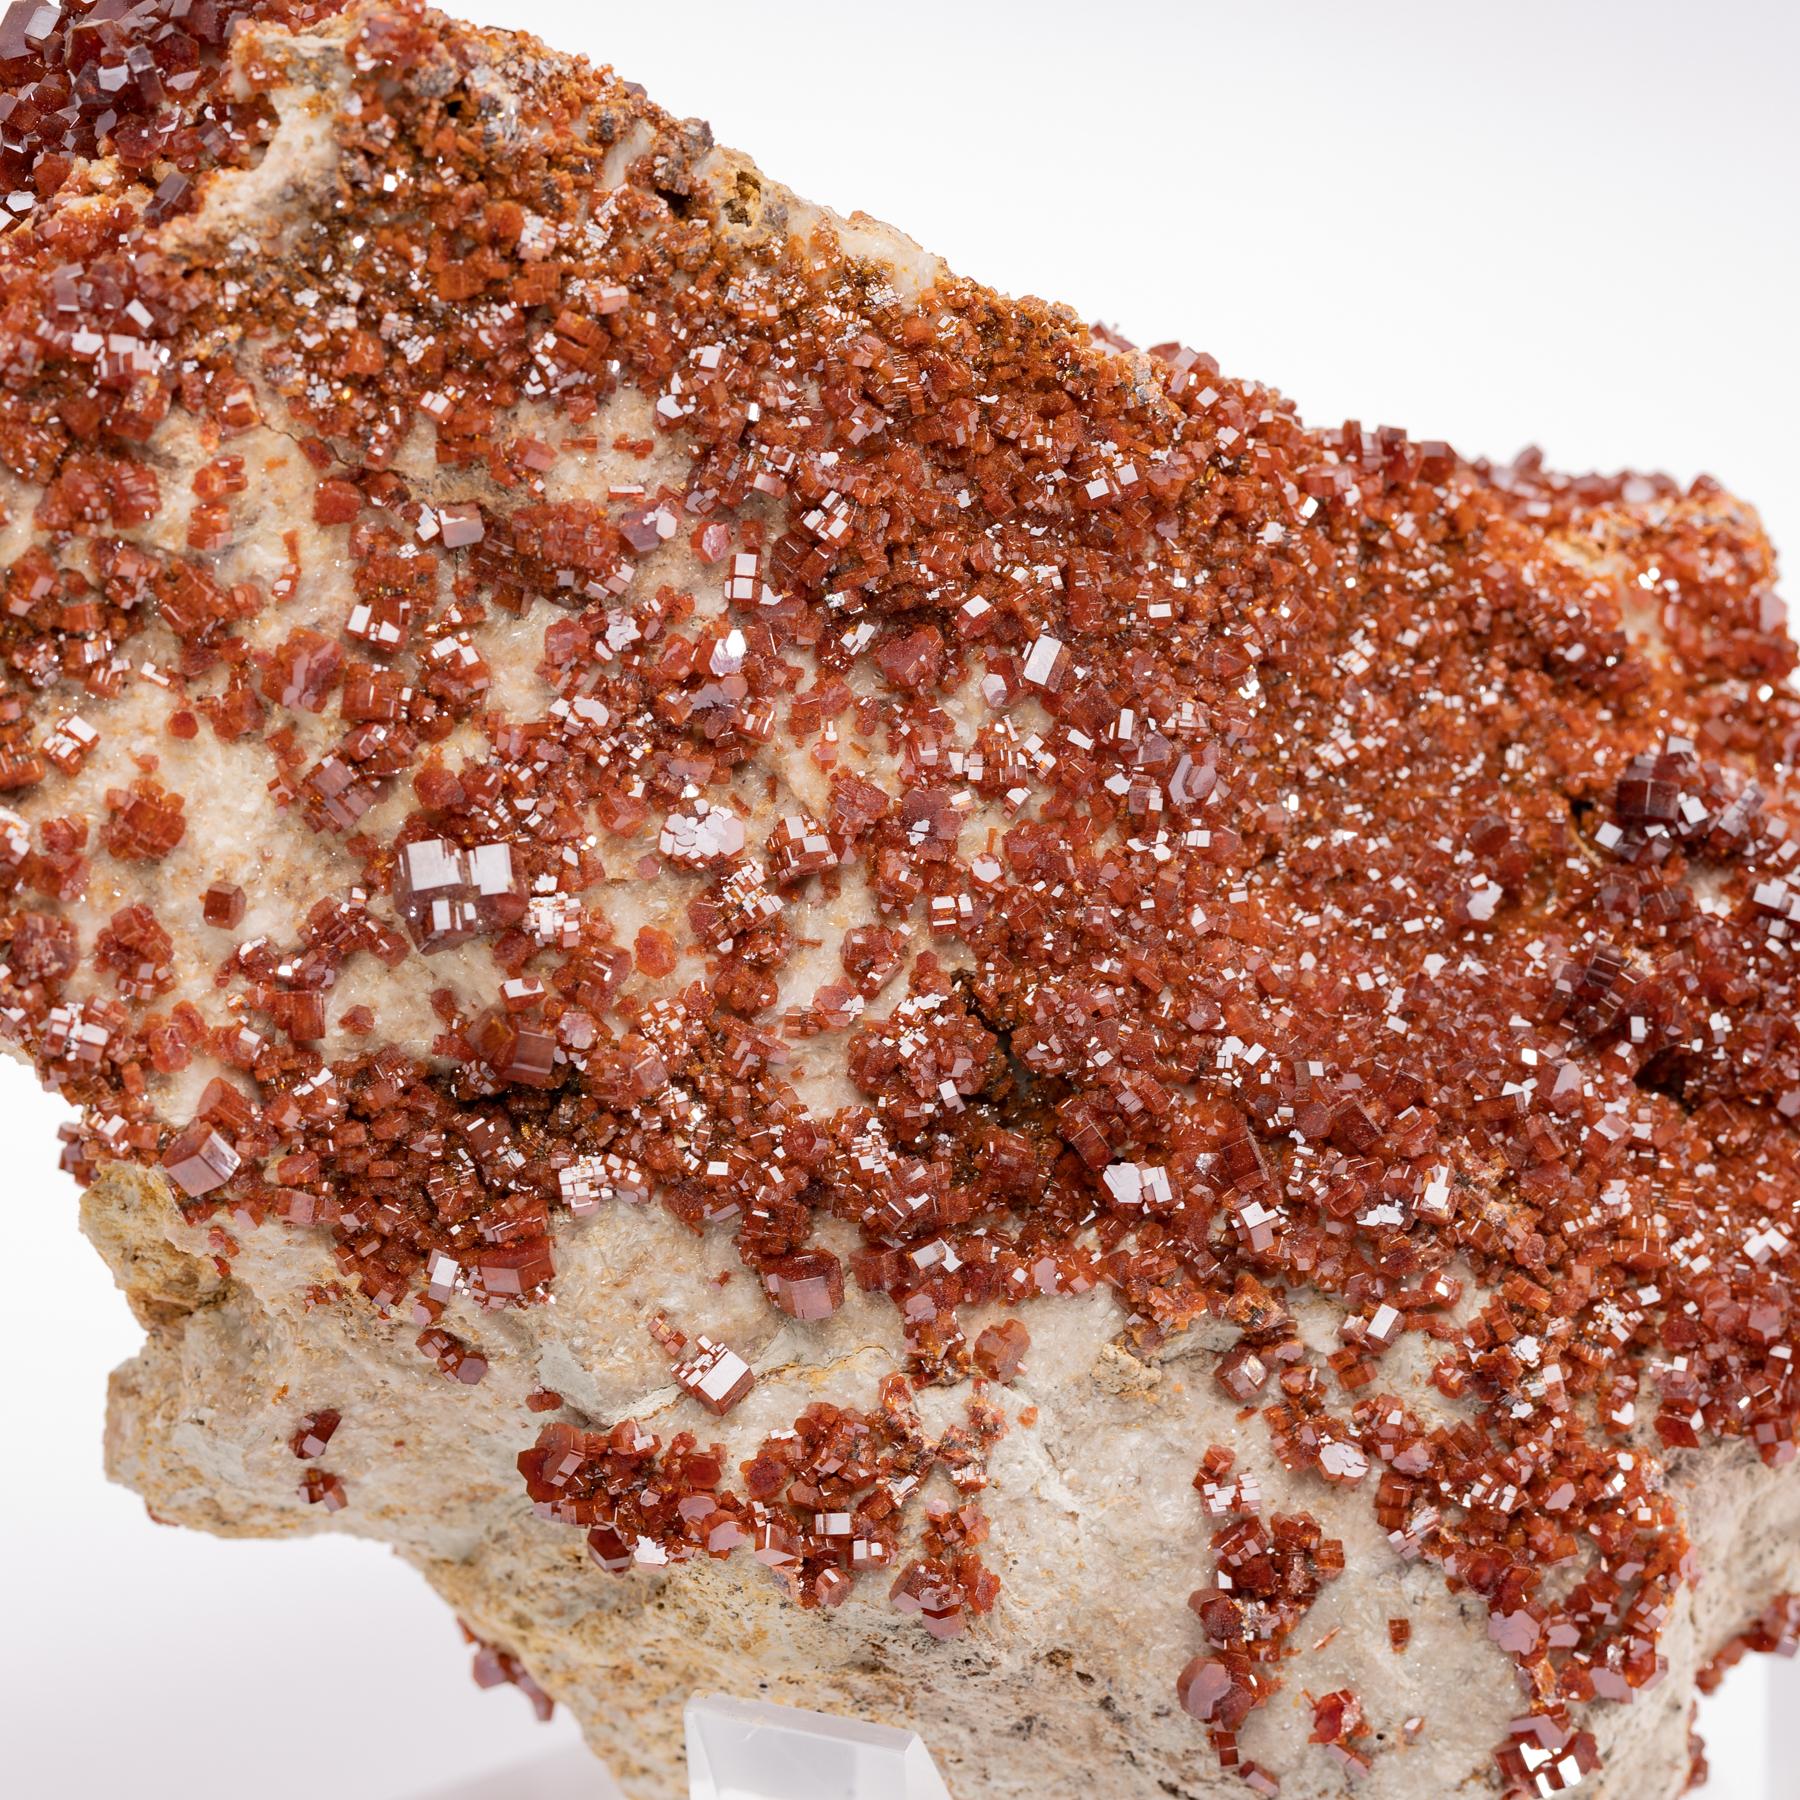 Contemporary Vanadinite Crystals with Vibrant Colors and Lots of Blink on Custom Acrylic Base For Sale